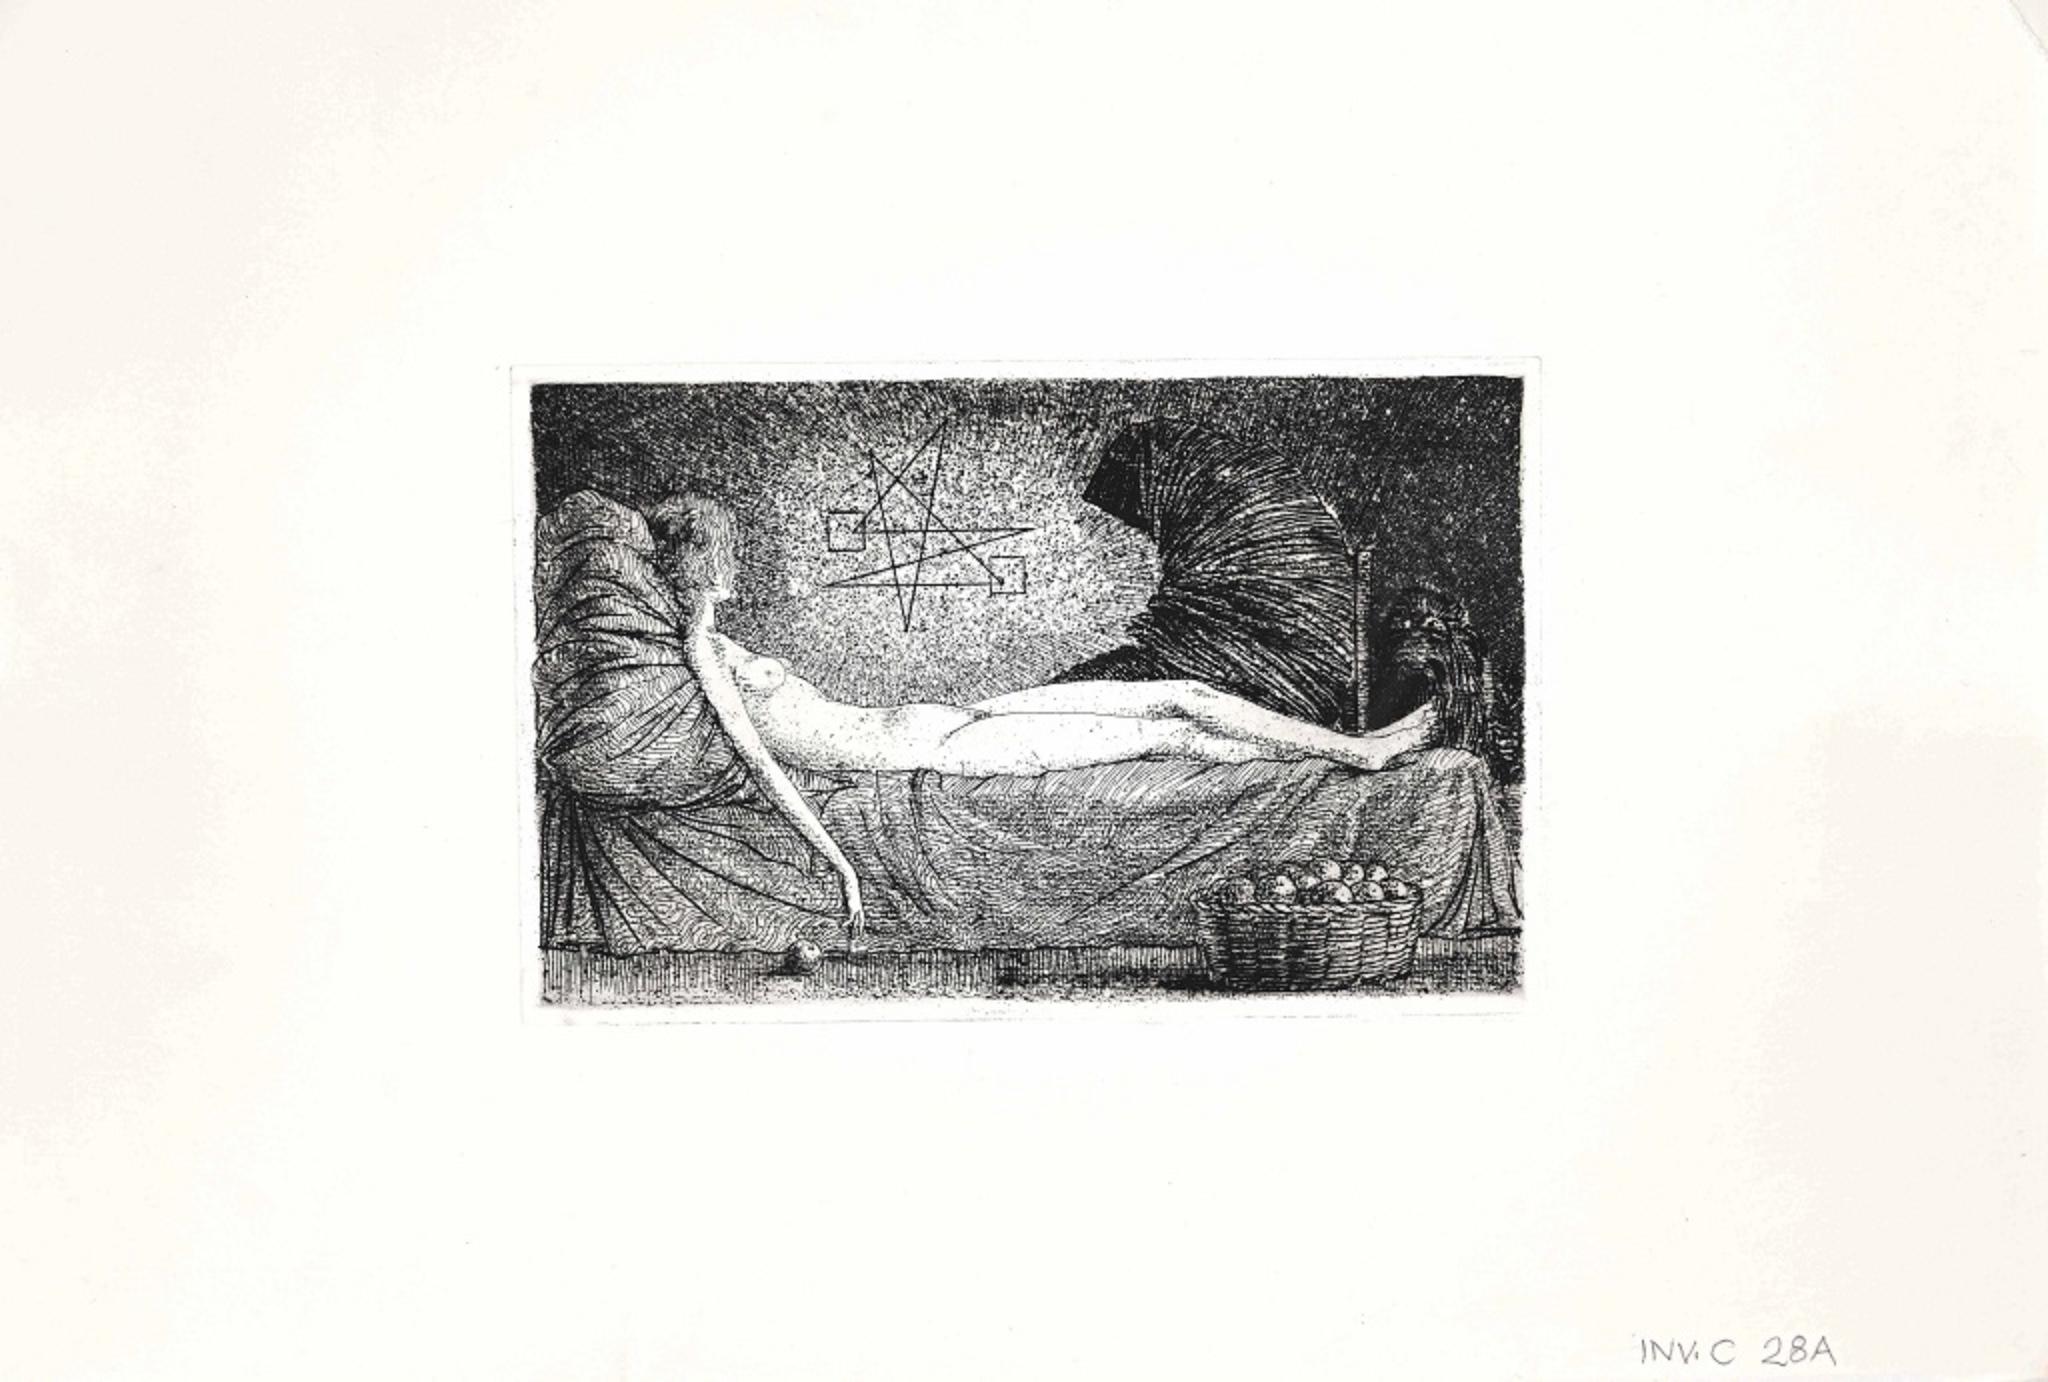 The Lying Sibyl - Original Lithograph by Leo Guida  - 1970s